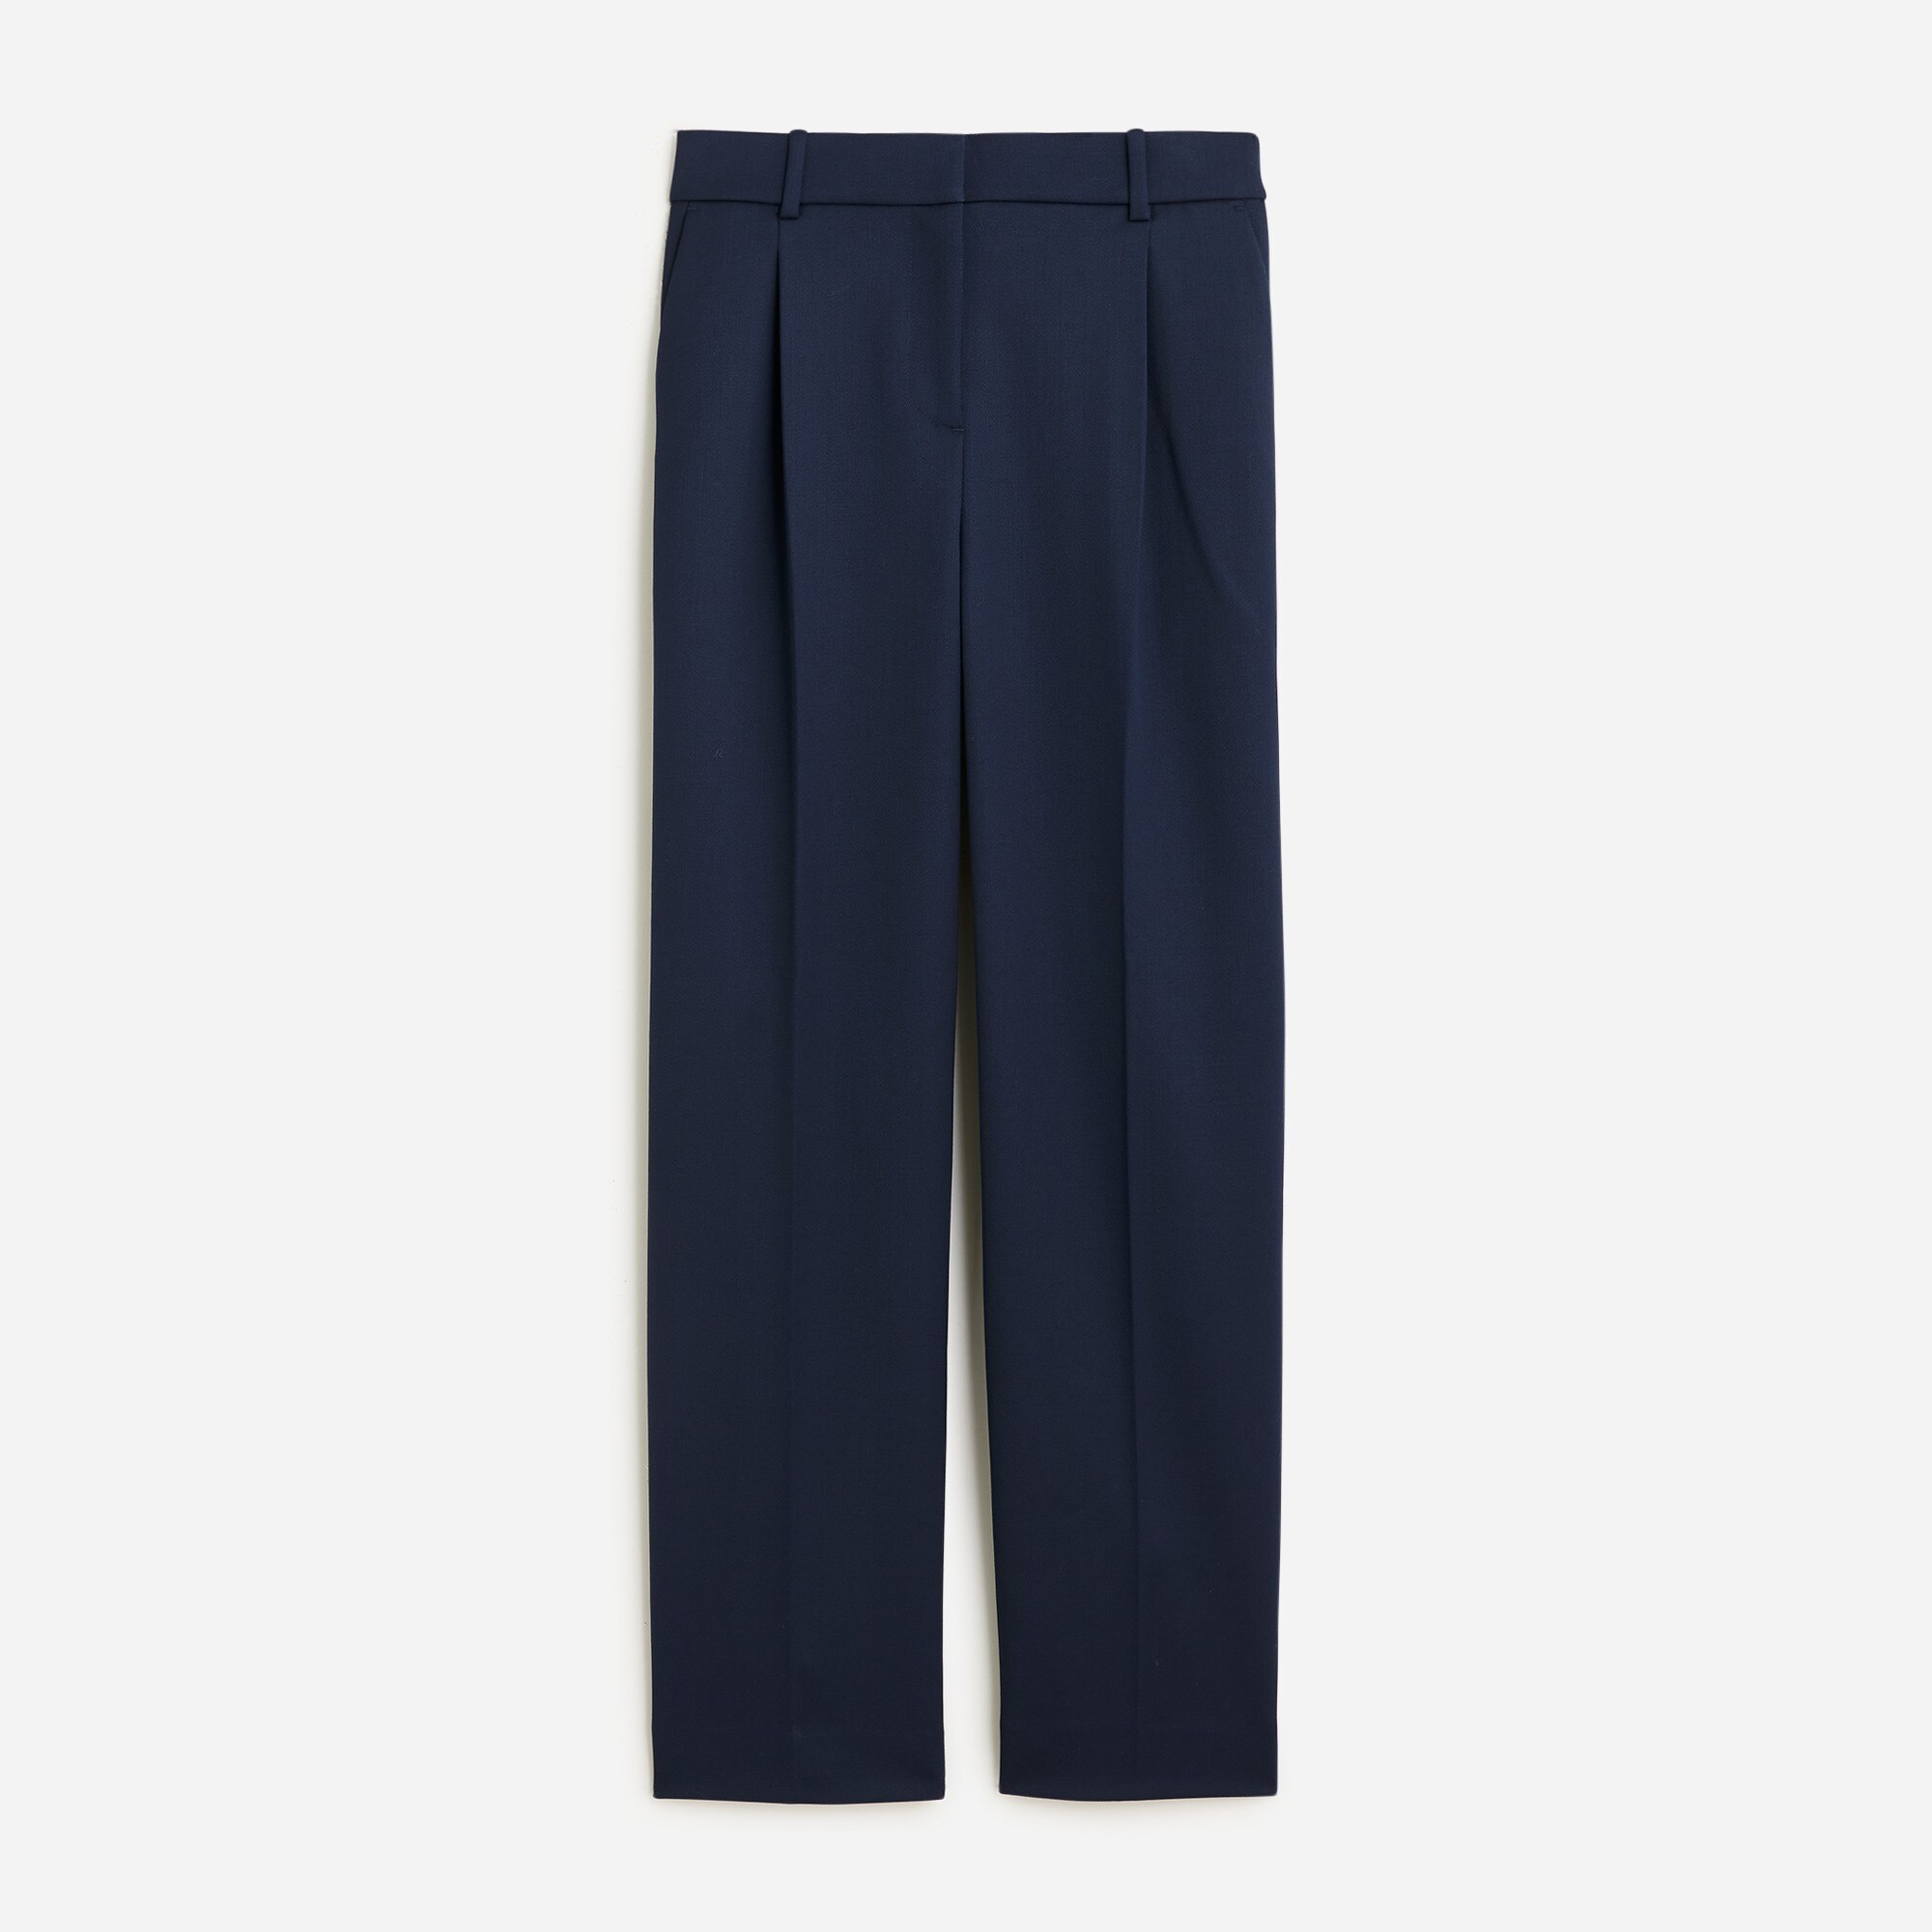  Tall straight-leg essential pant in wool blend